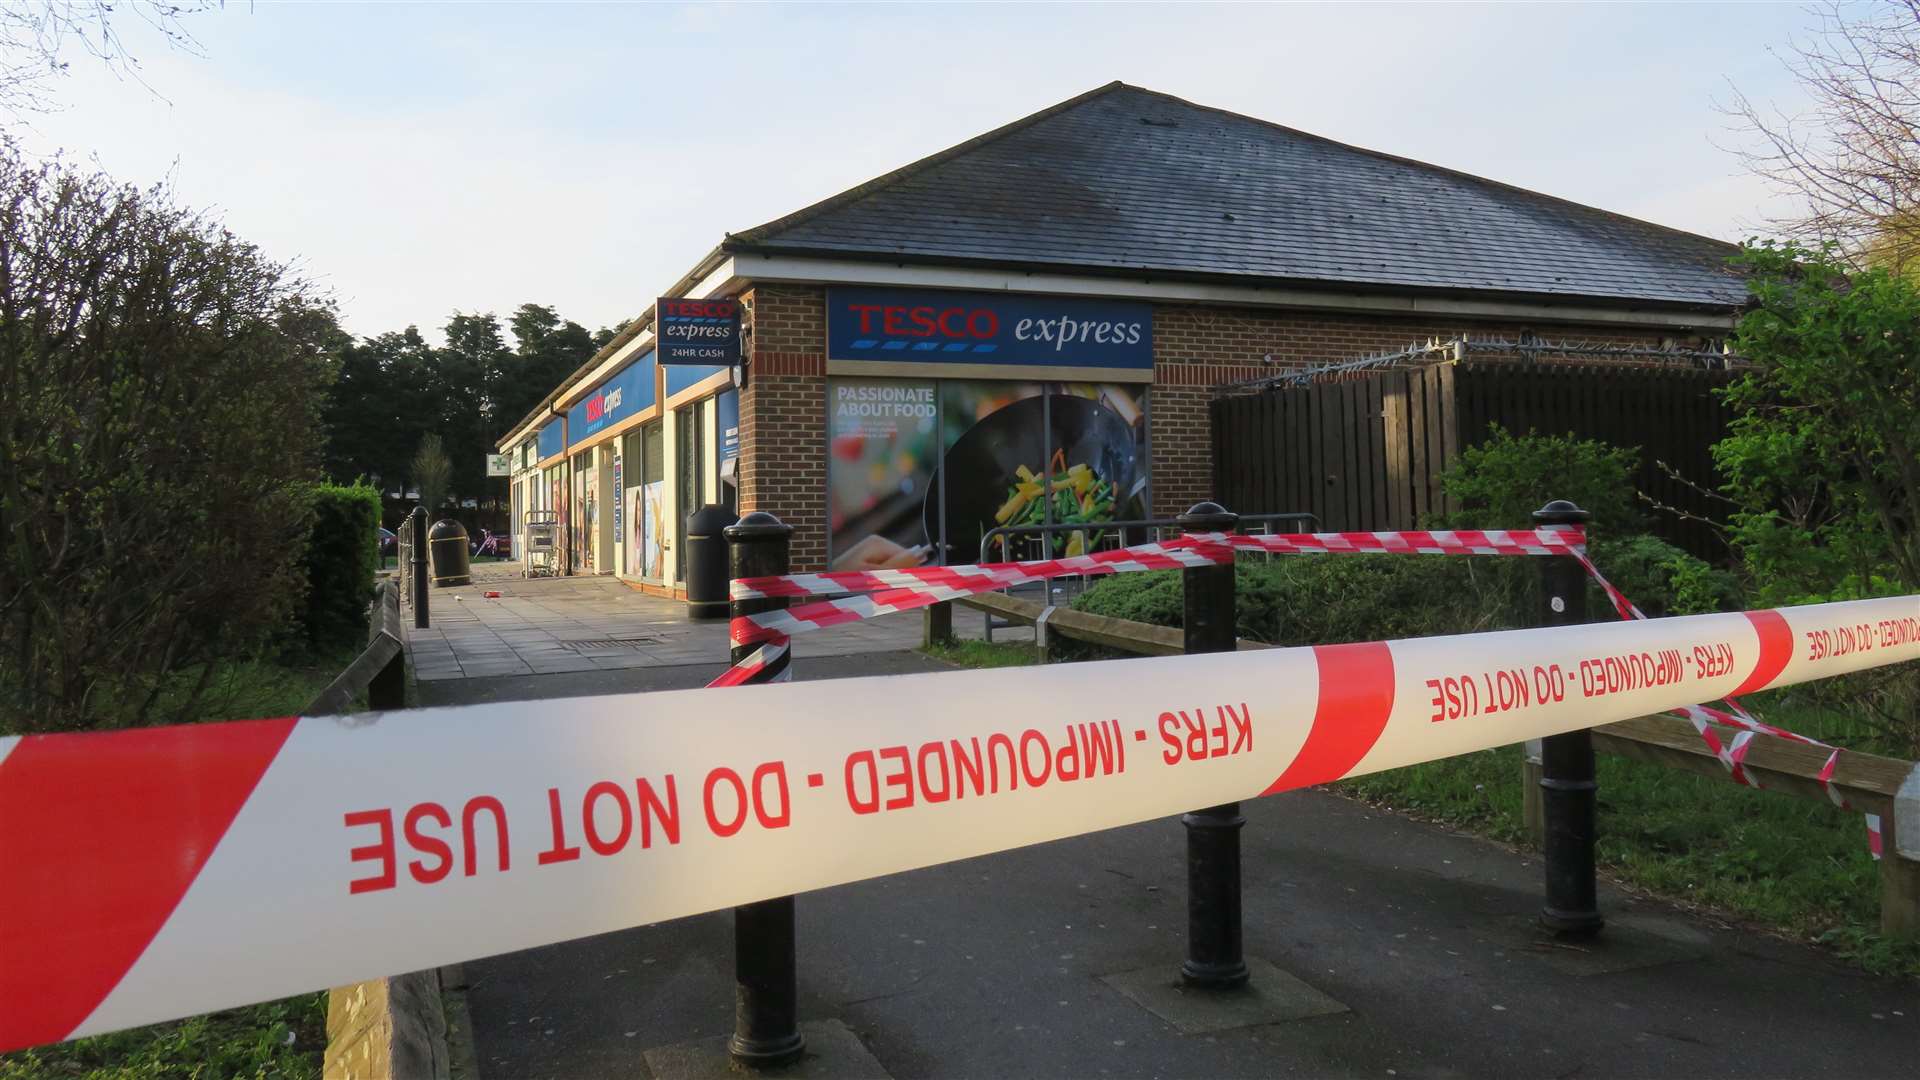 The fire-damaged Tesco Express store in Mill Court, Ashford